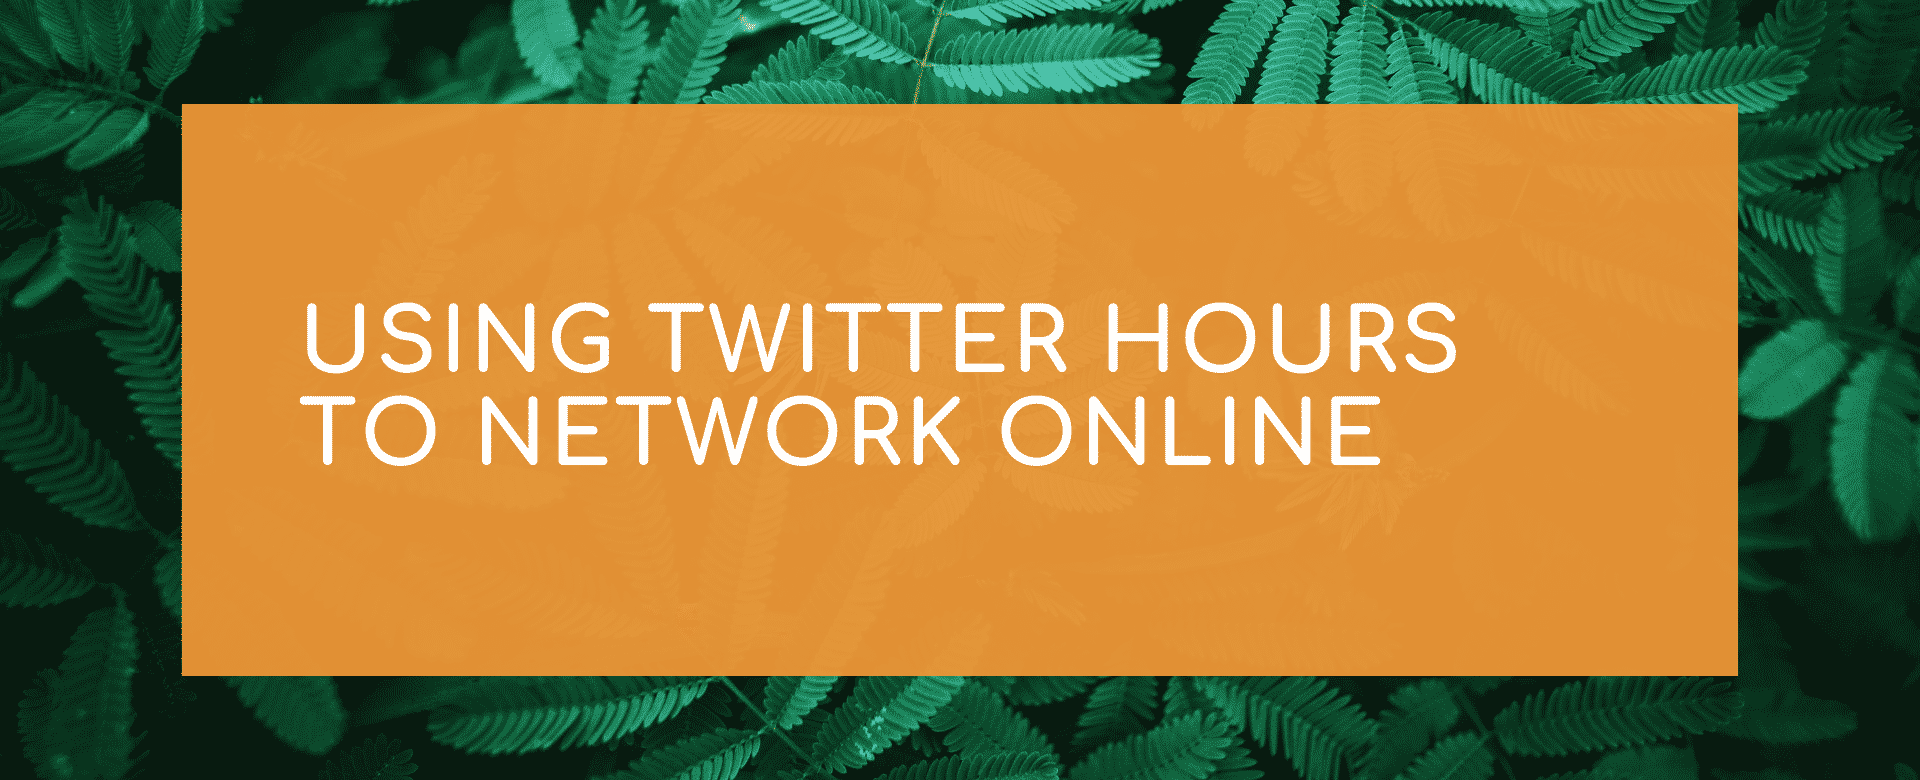 Using Twitter Hours to Network Online